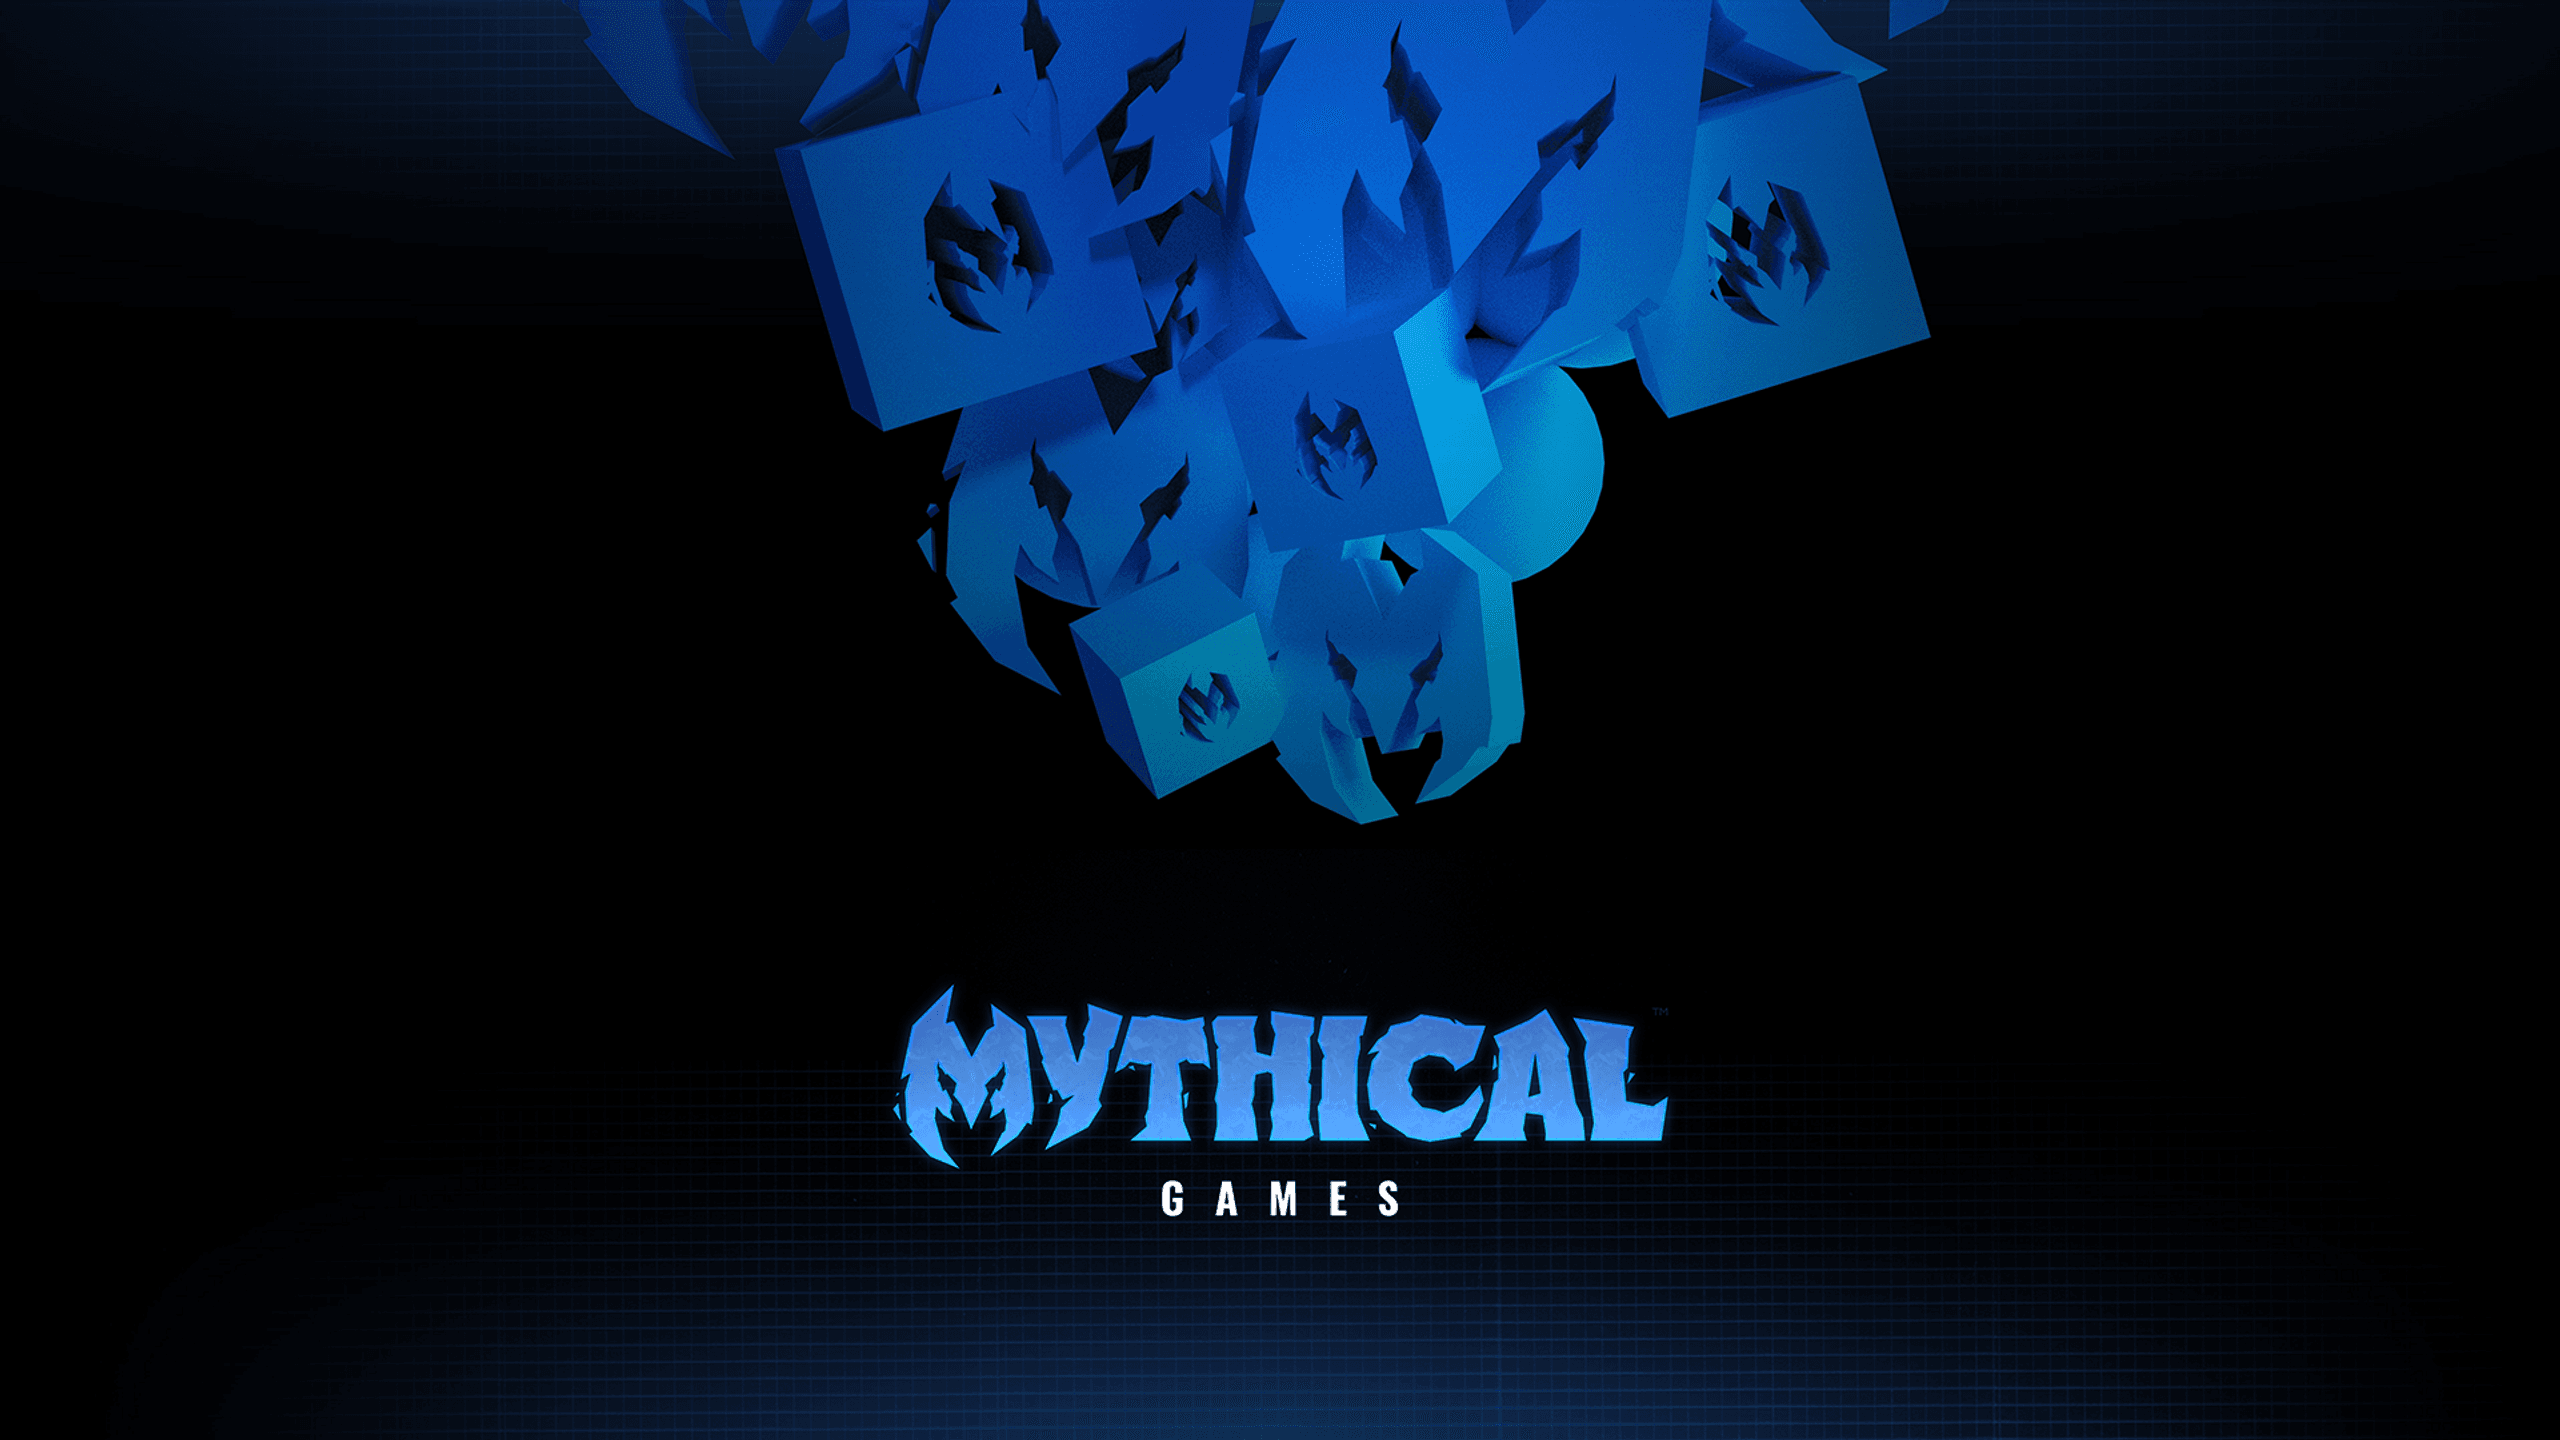 mythical games studio game nổi tiếng